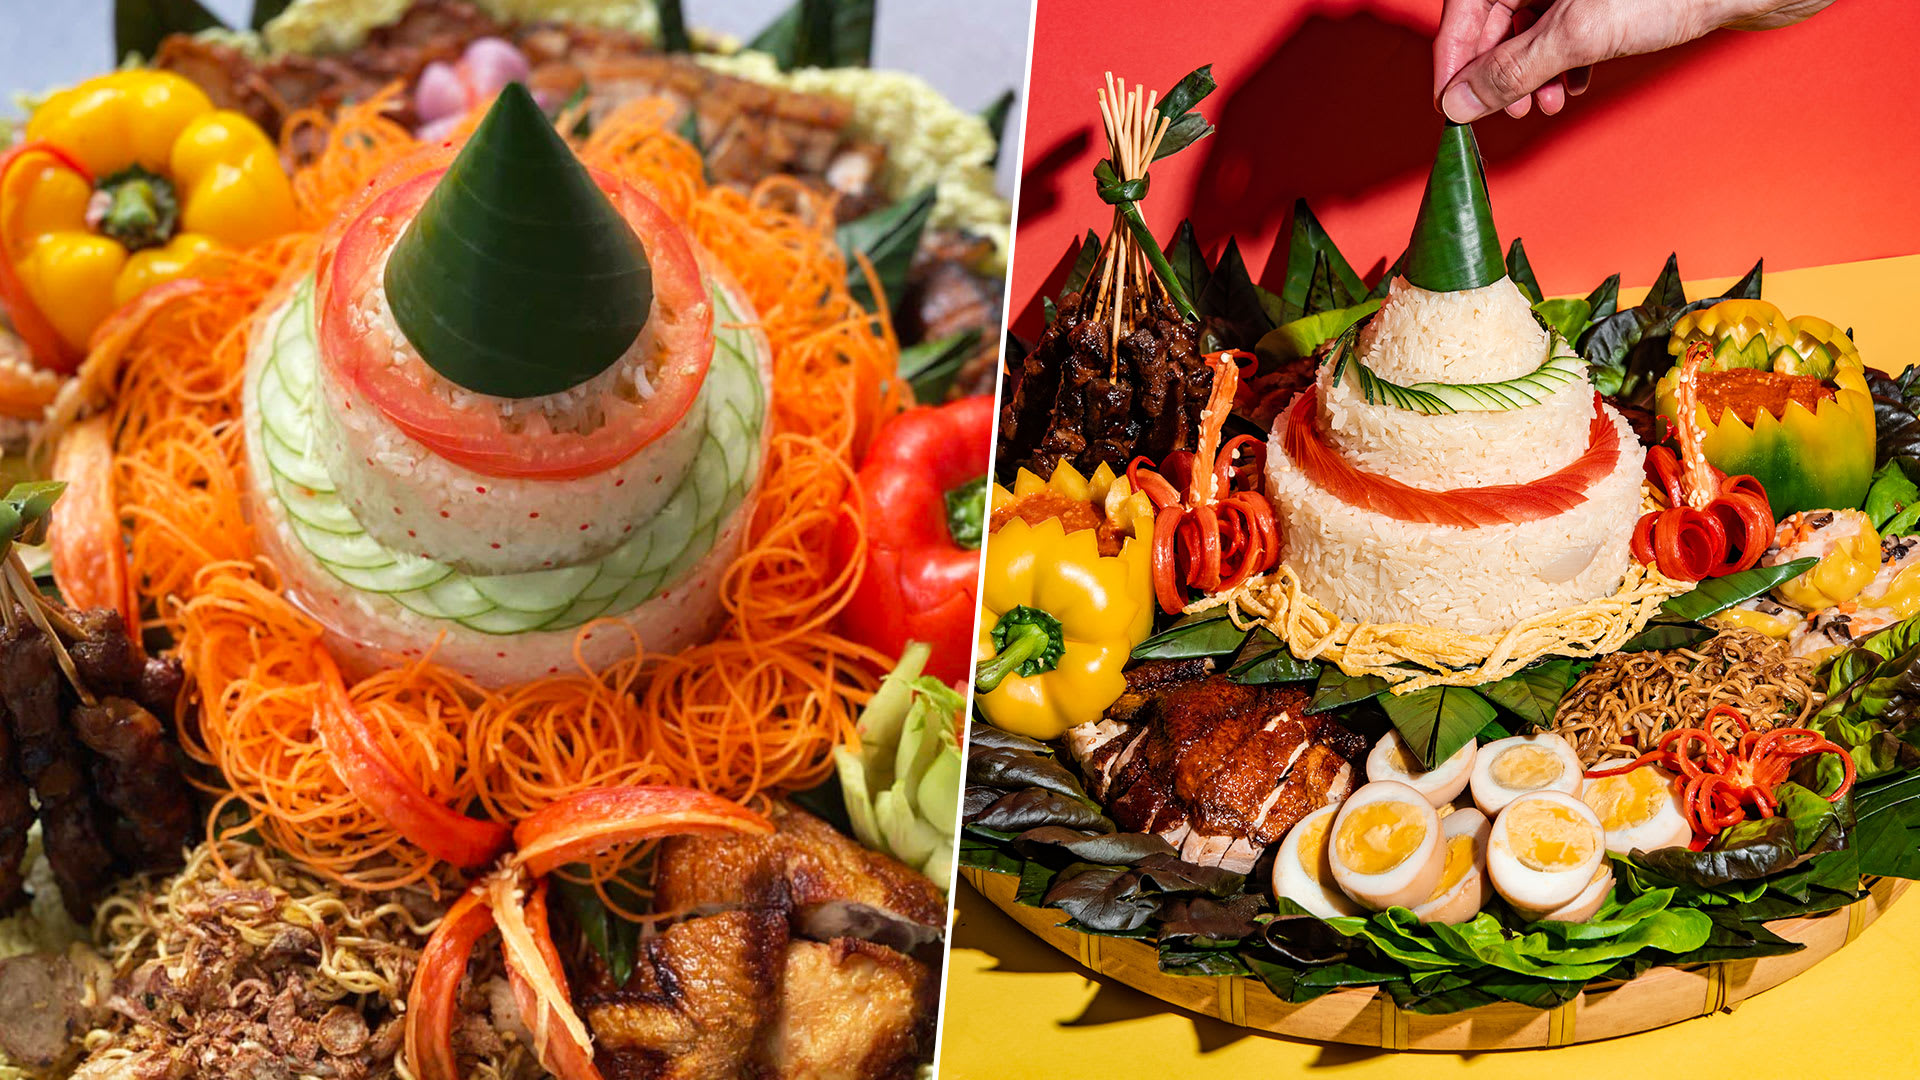 Indonesian Eatery Kota88 Sells Nasi Tumpeng With Hainanese Chicken Rice & Roast Meat